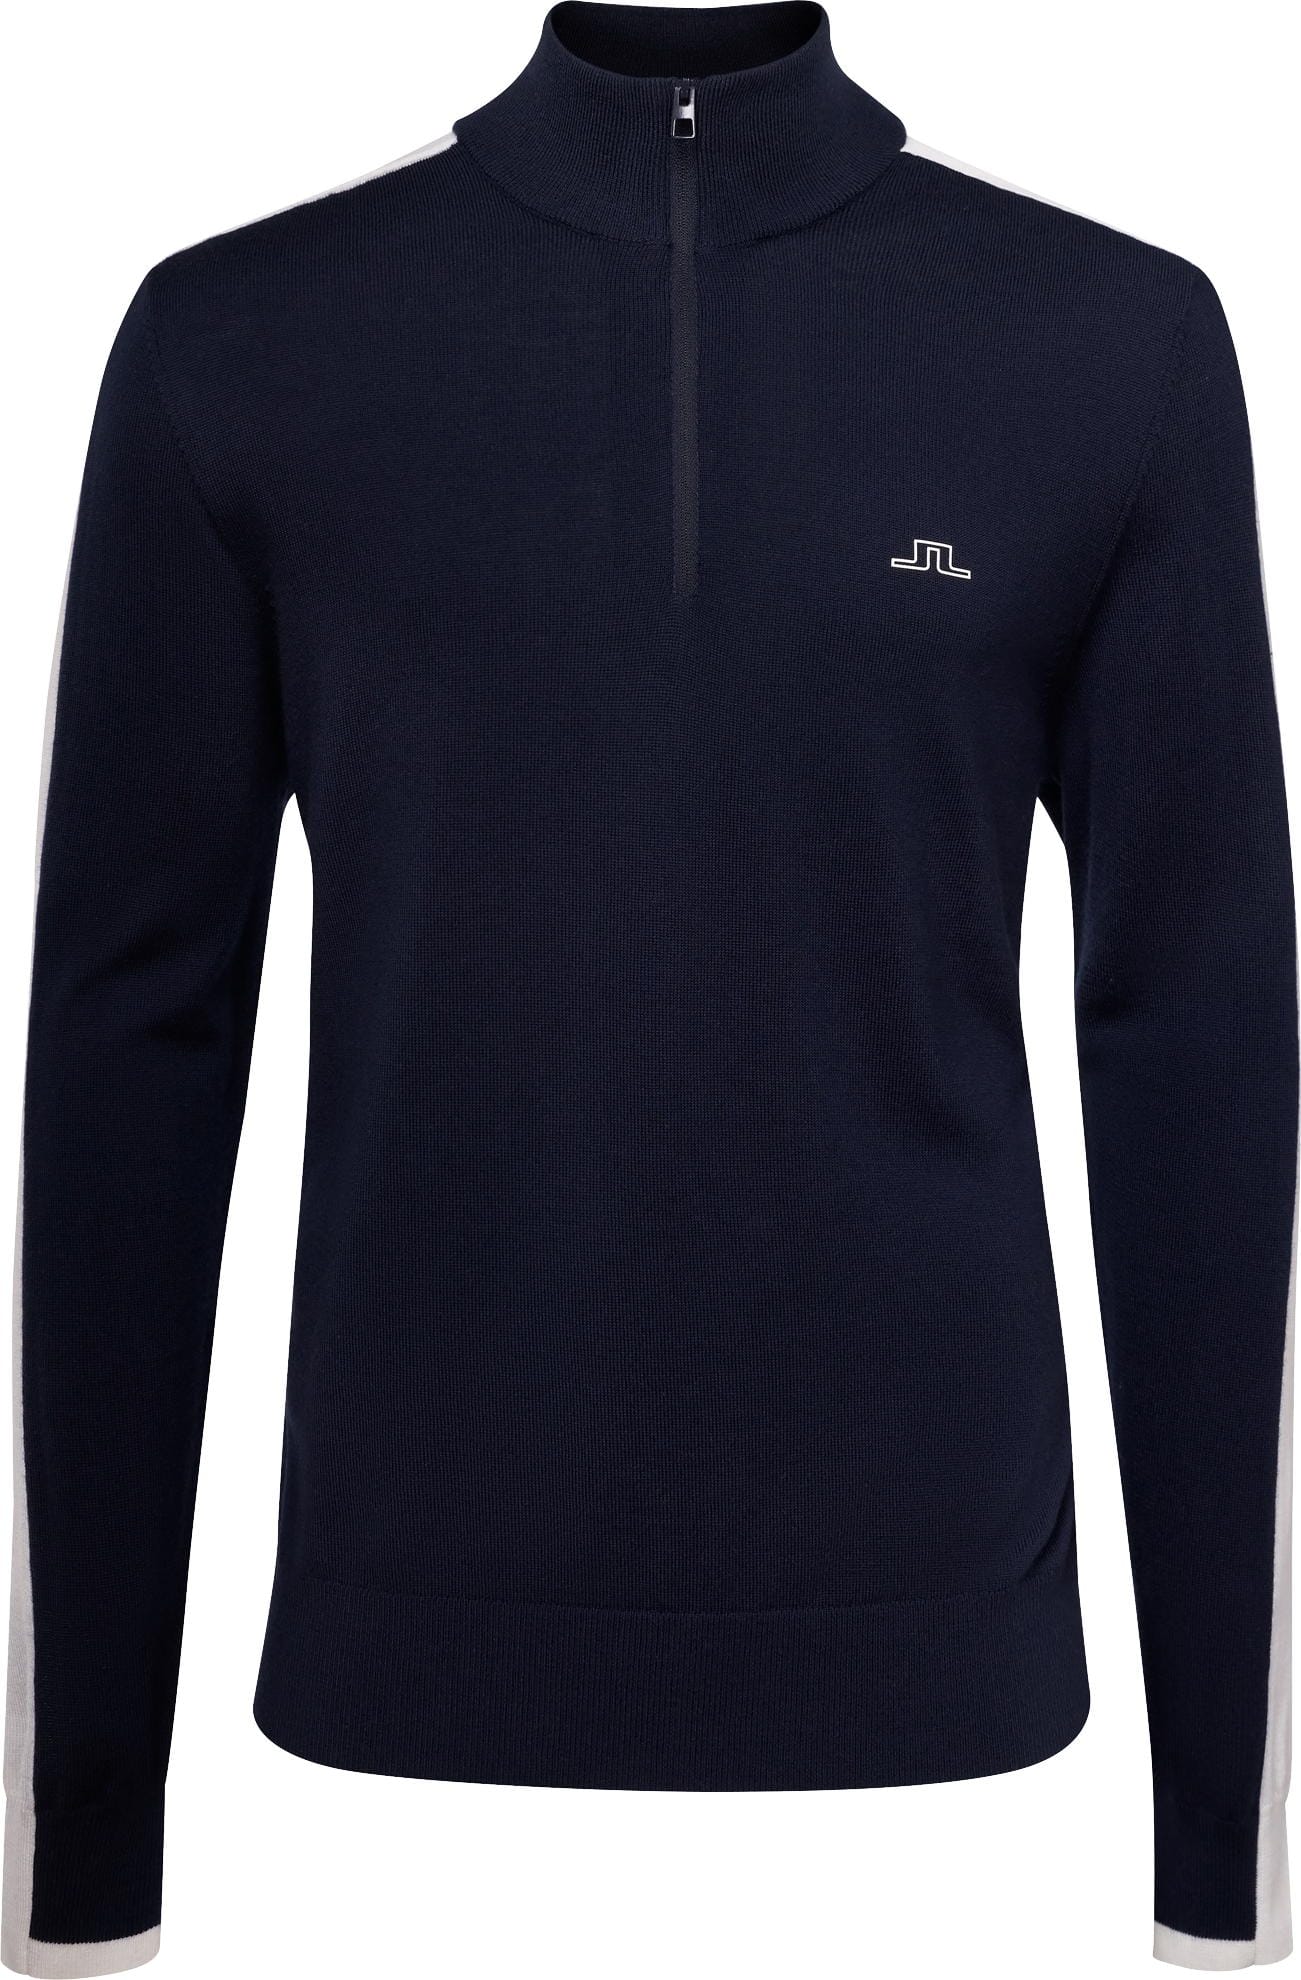 J.Lindeberg Andreas Knitted Golf Sweater, navy